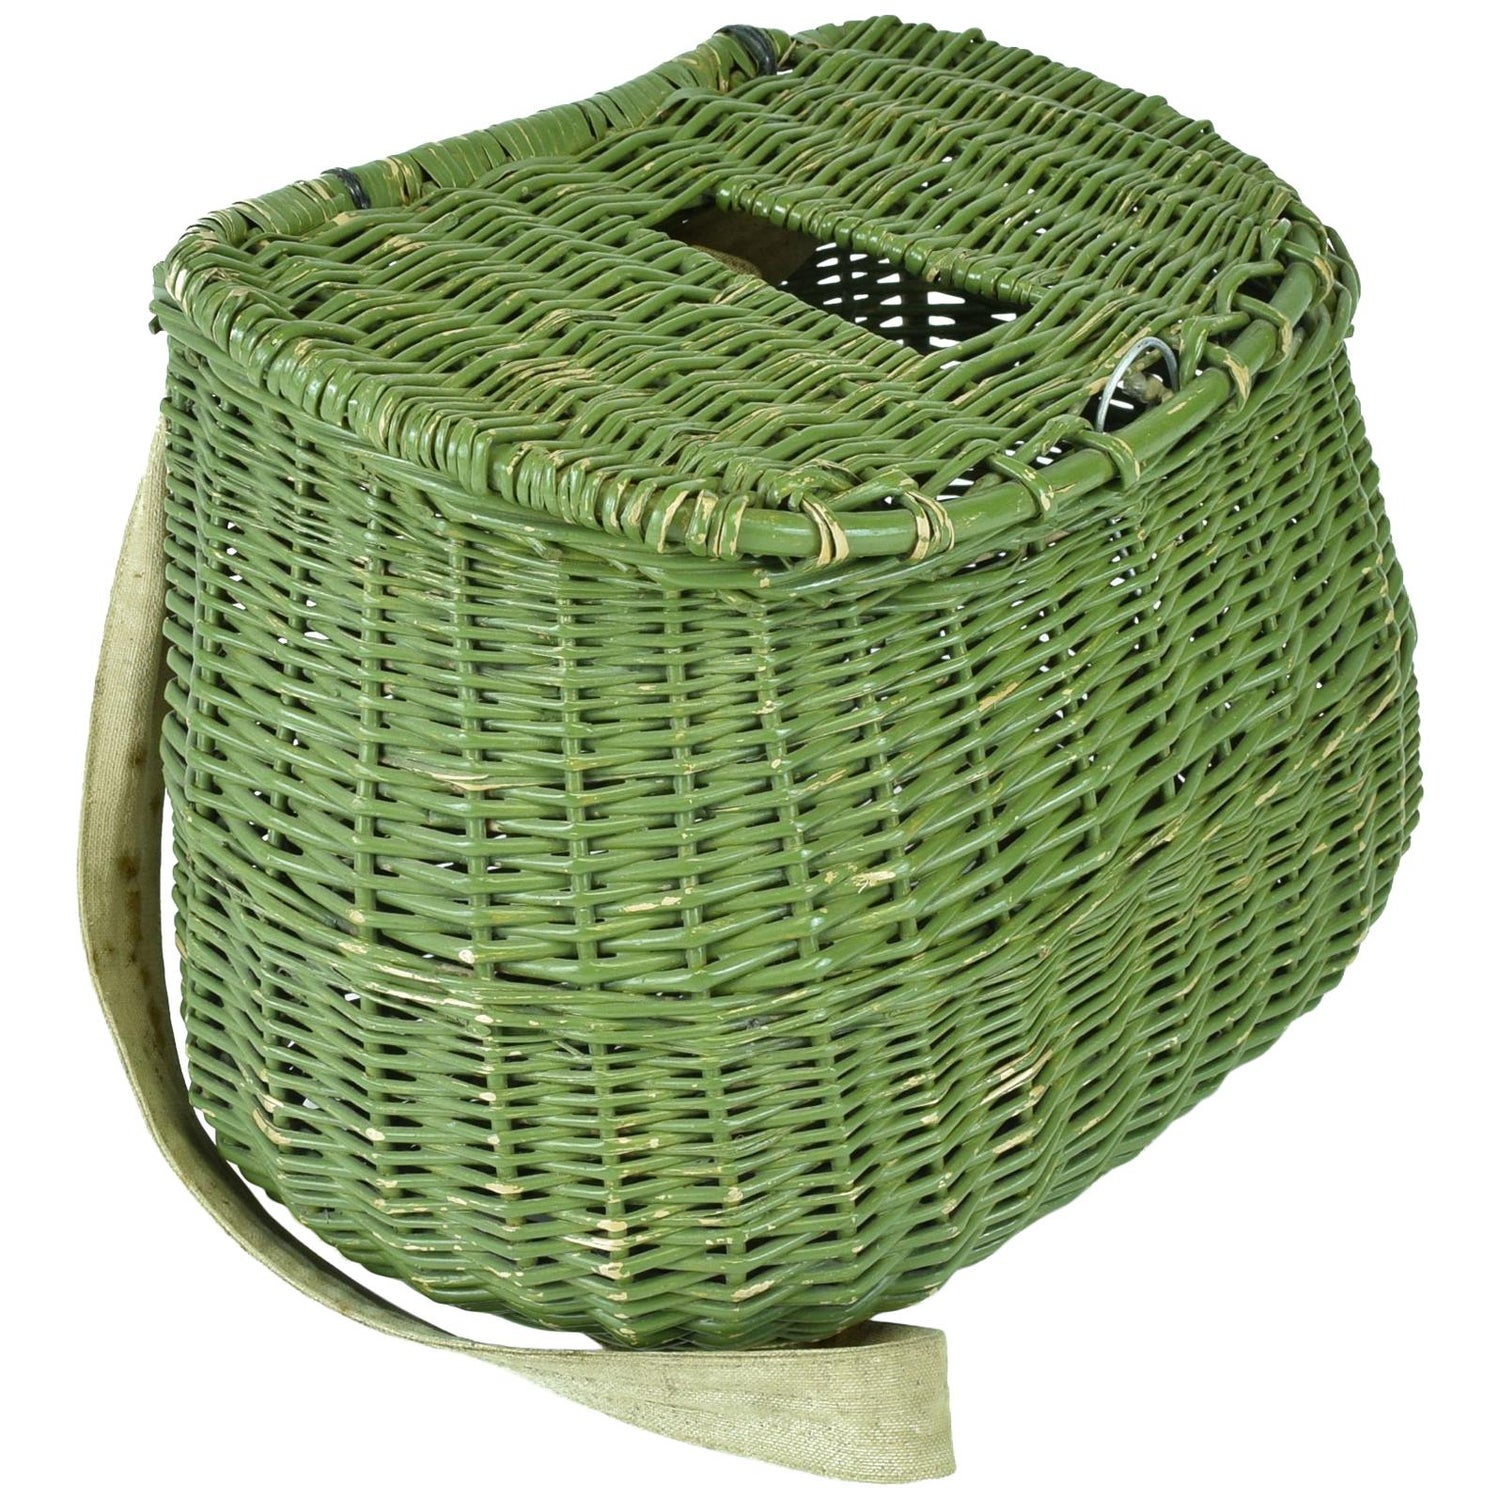 Vintage Victorian Wicker Fishing Creel For Sale at 1stDibs